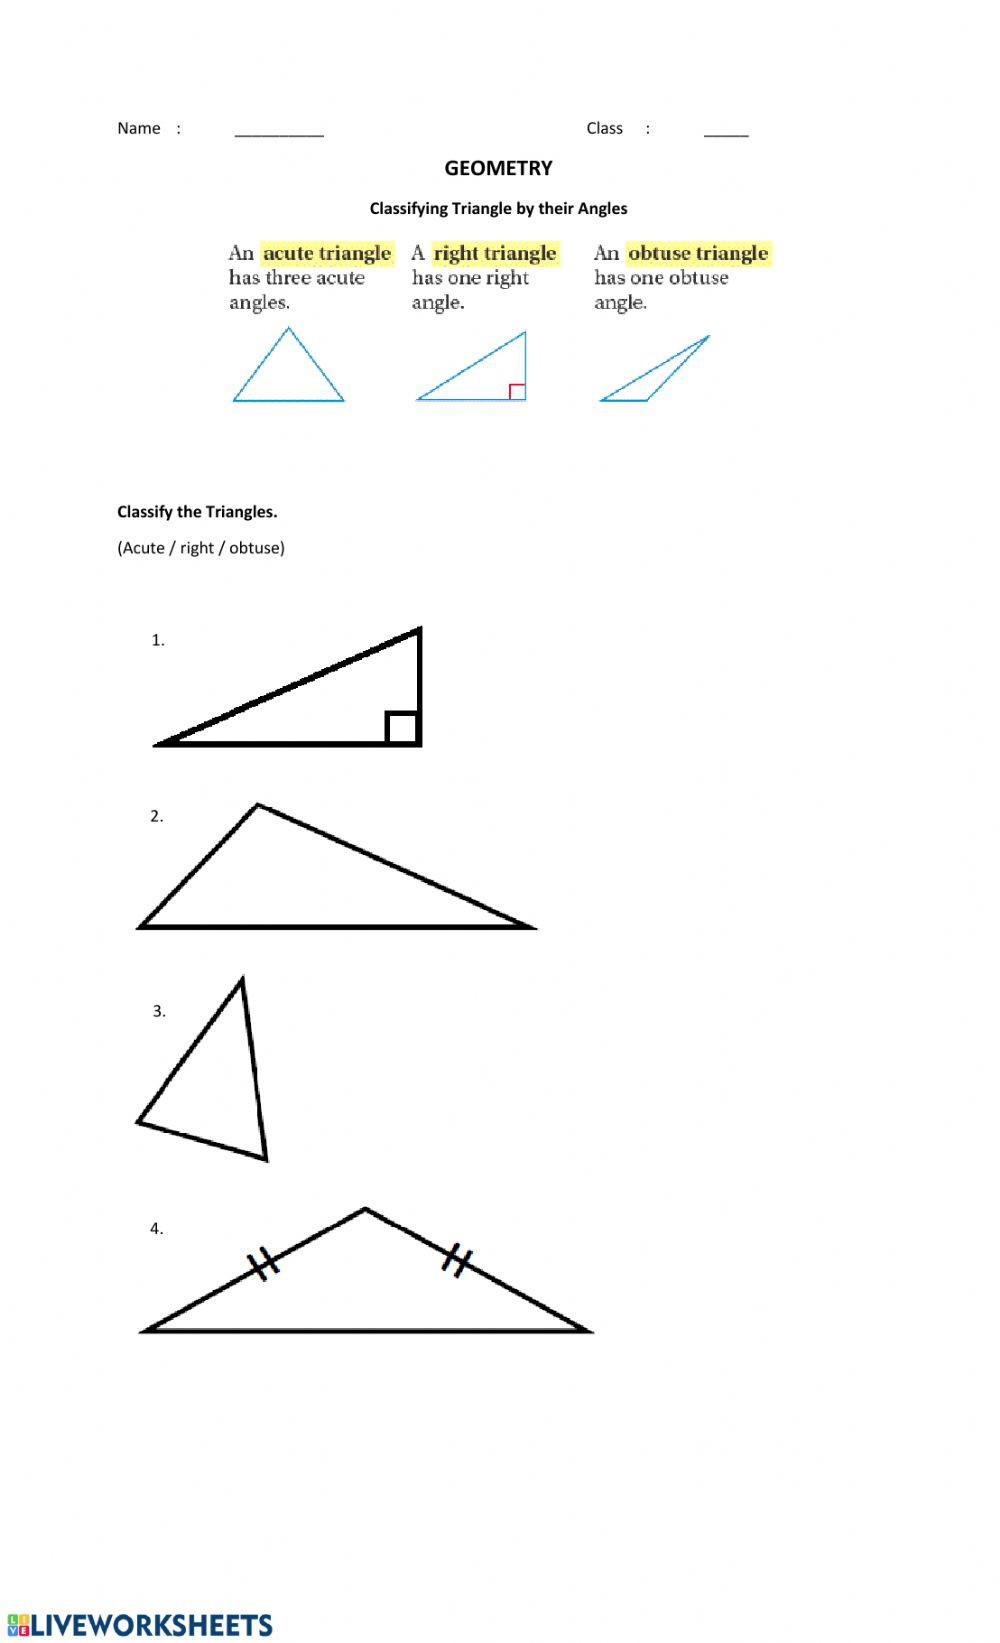 Centers Of Triangles Worksheet Classifying Triangles by their Angles Geometry Worksheet